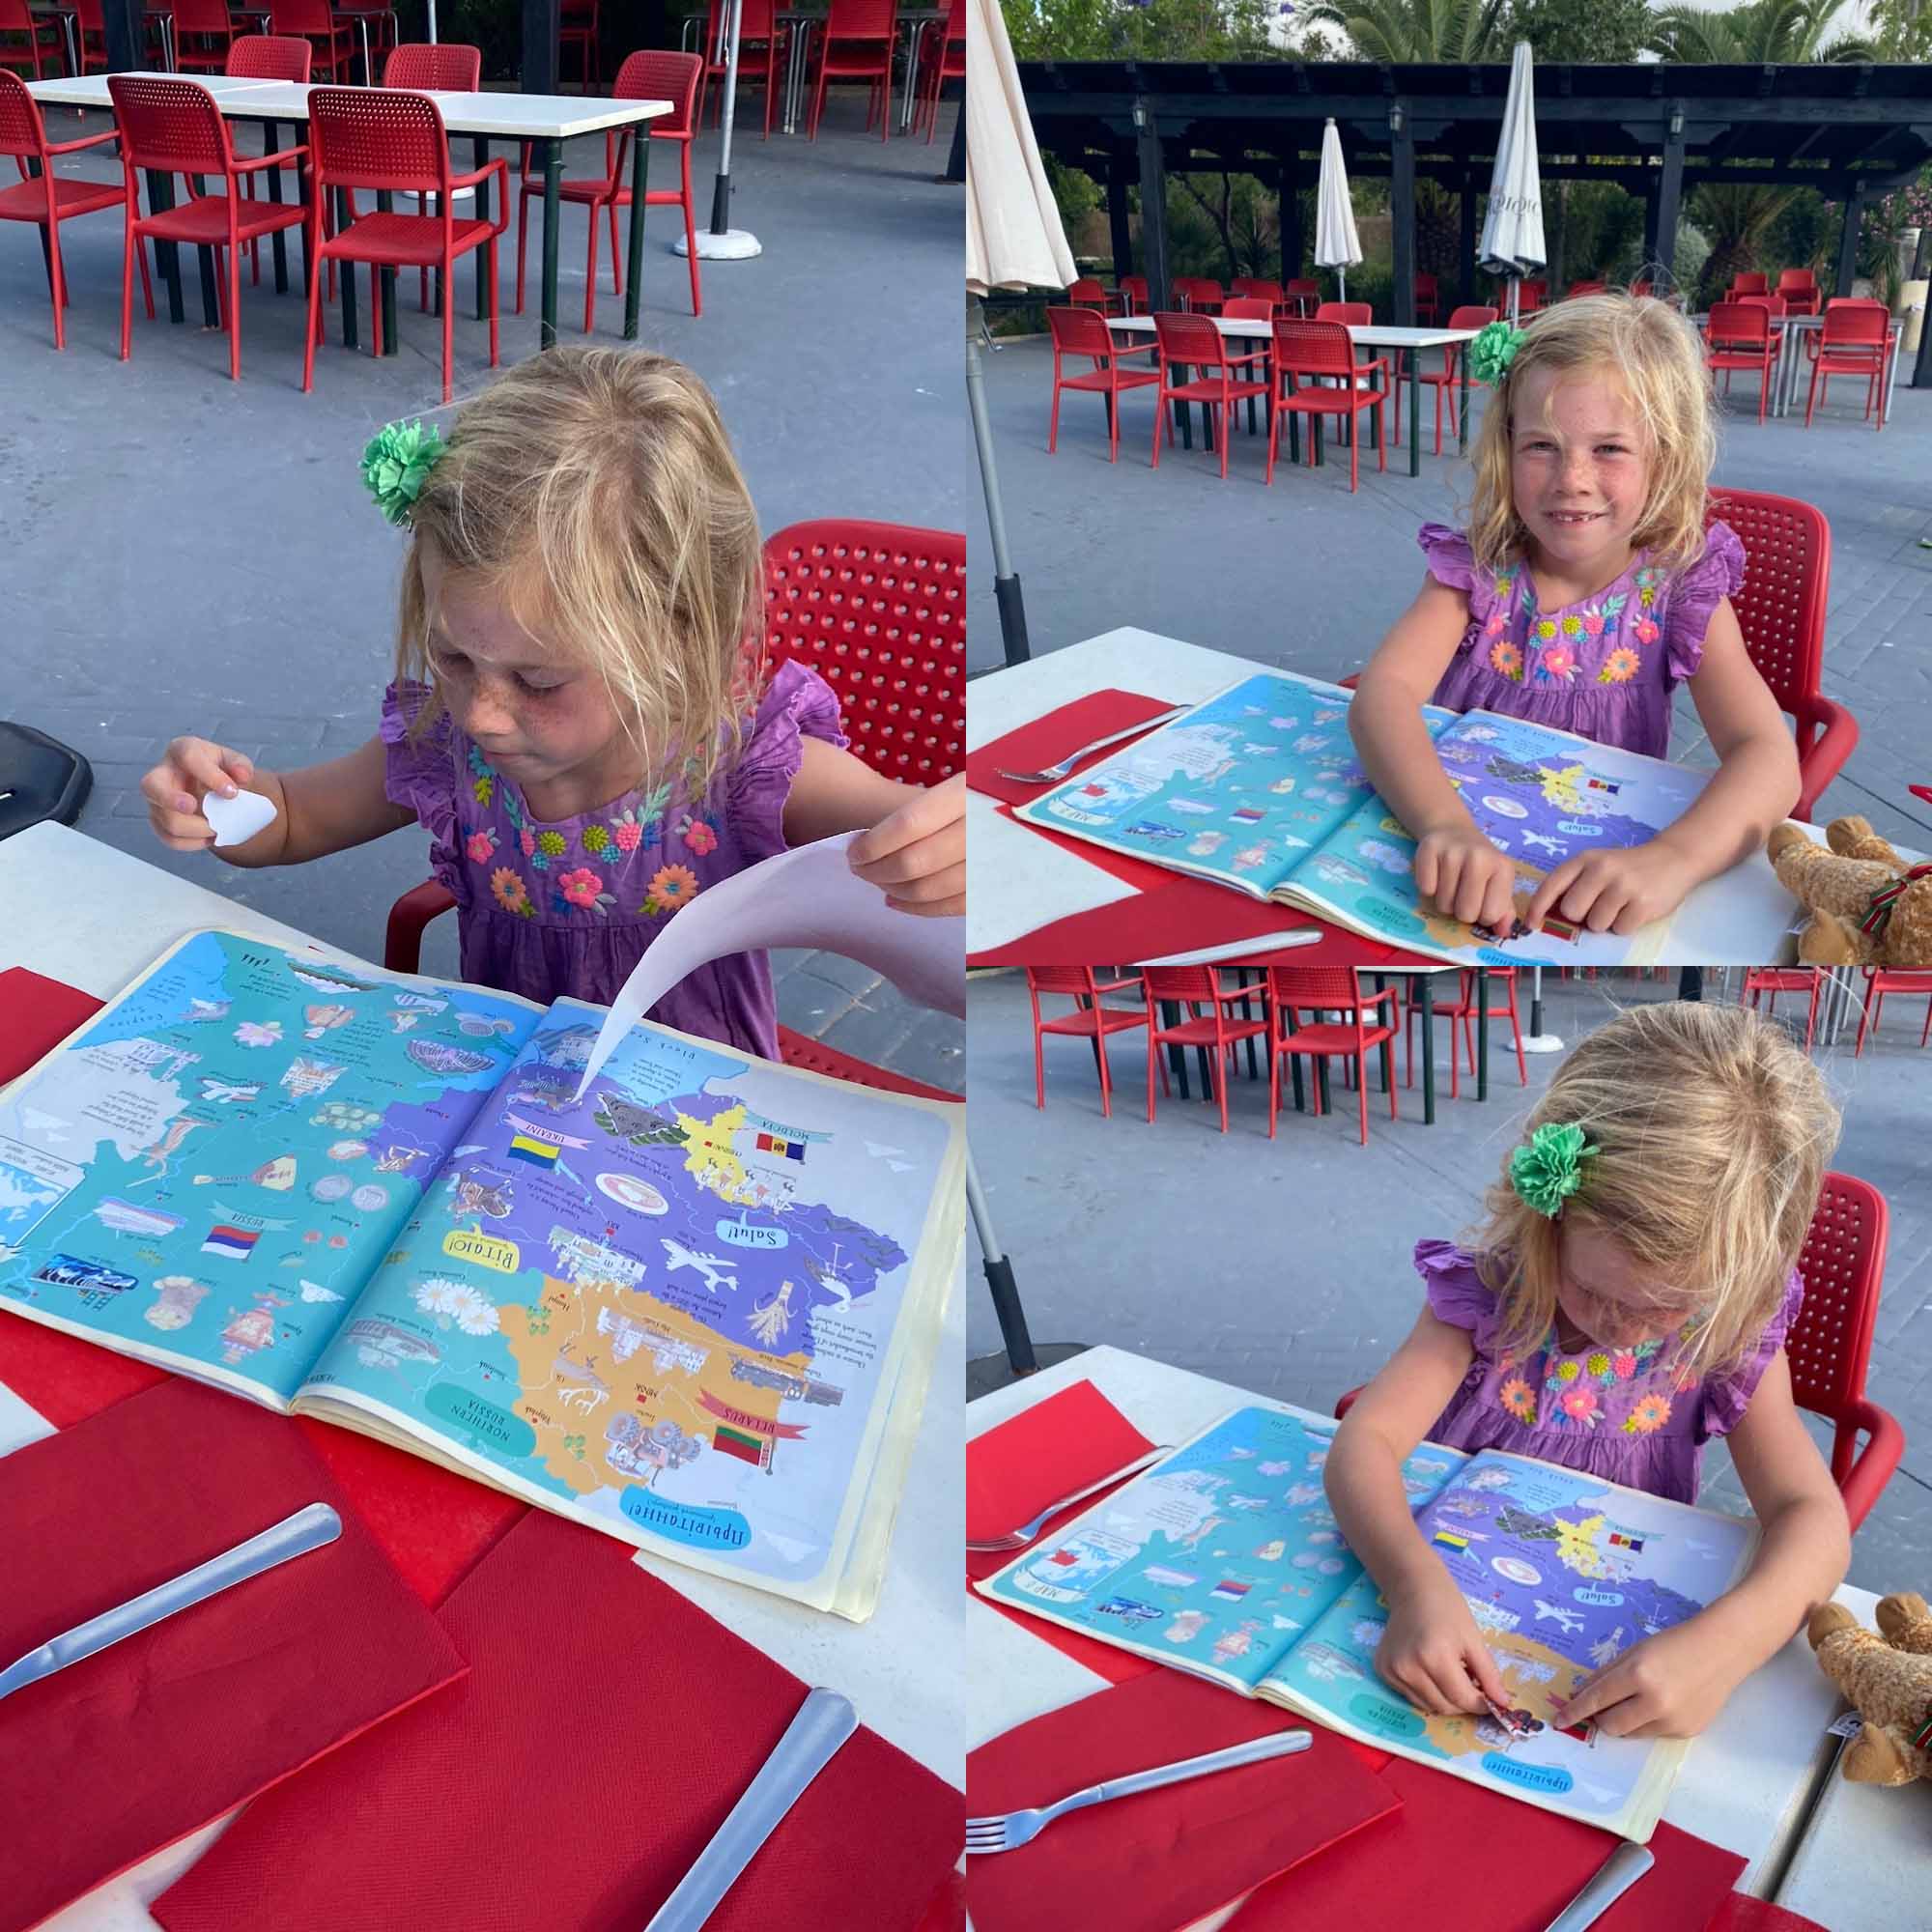 collage of images of a young girl sat at a table sticking stickers into a travel-themed sticker book